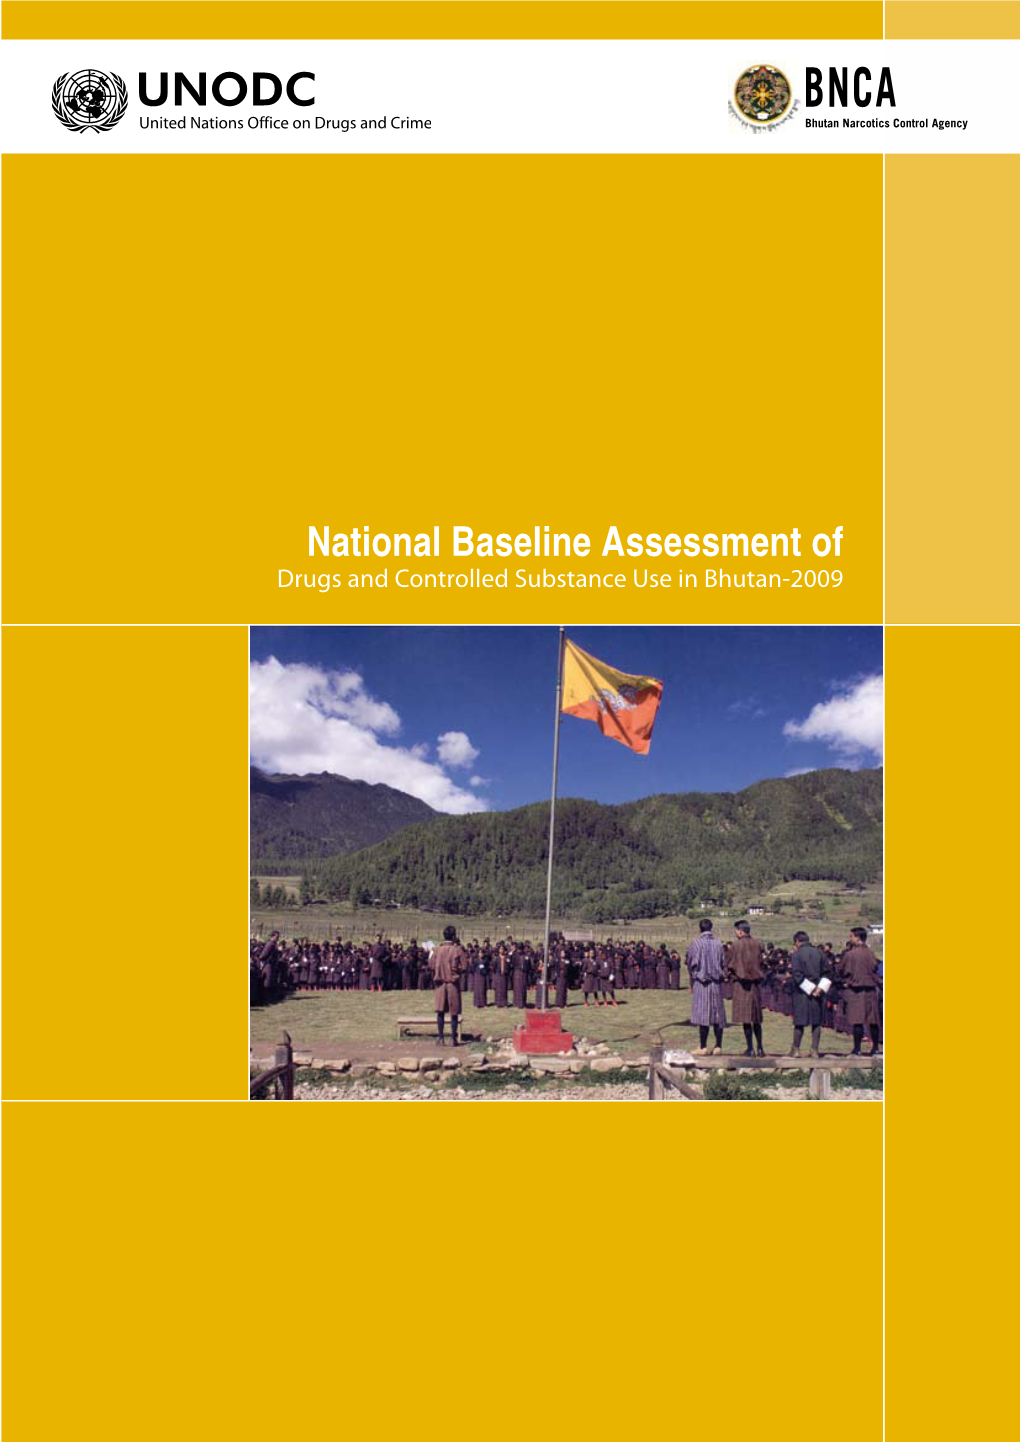 National Baseline Assessment of Drugs and Controlled Substance Use in Bhutan-2009